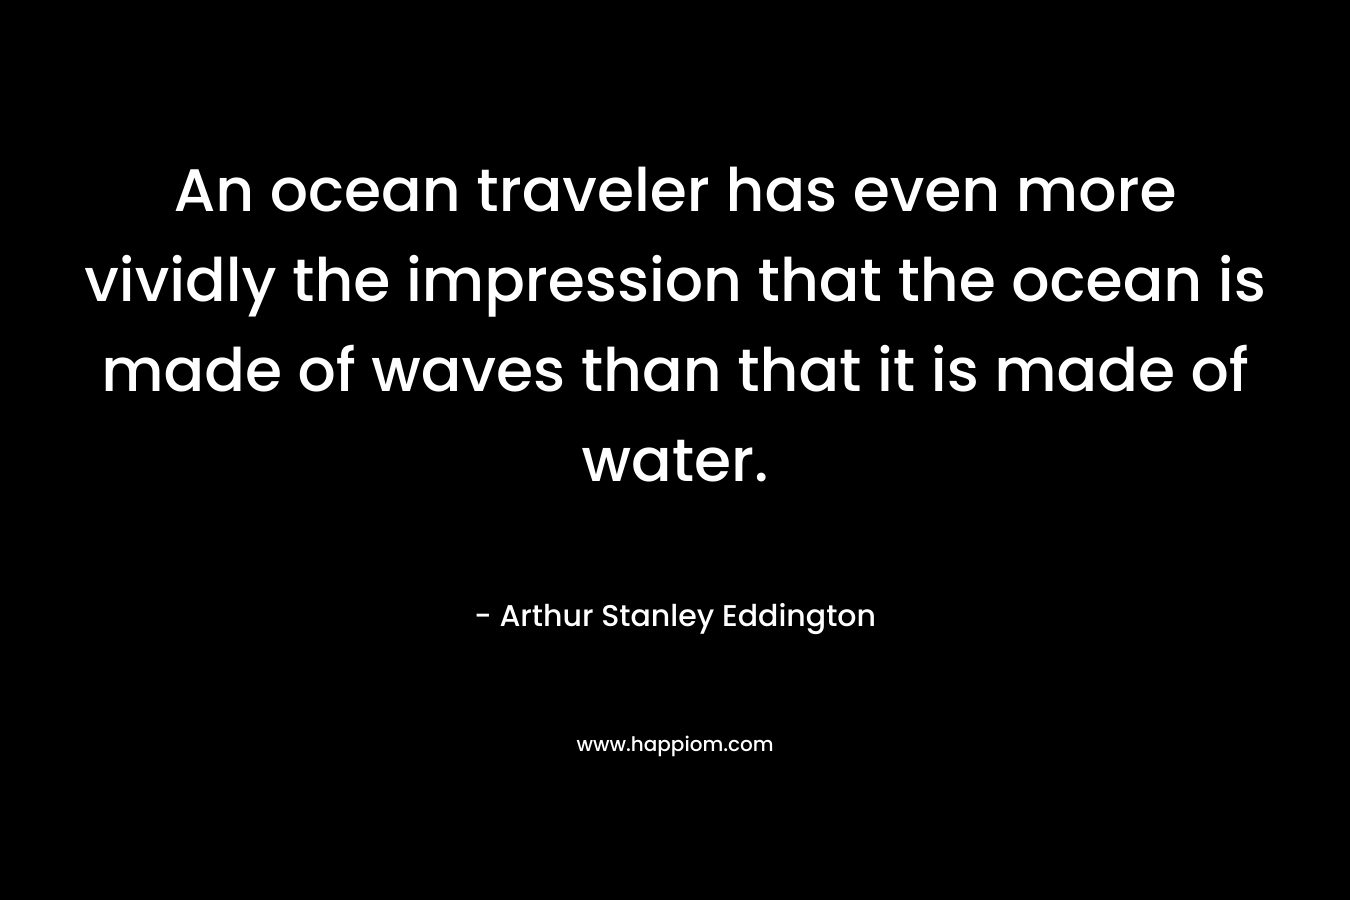 An ocean traveler has even more vividly the impression that the ocean is made of waves than that it is made of water.